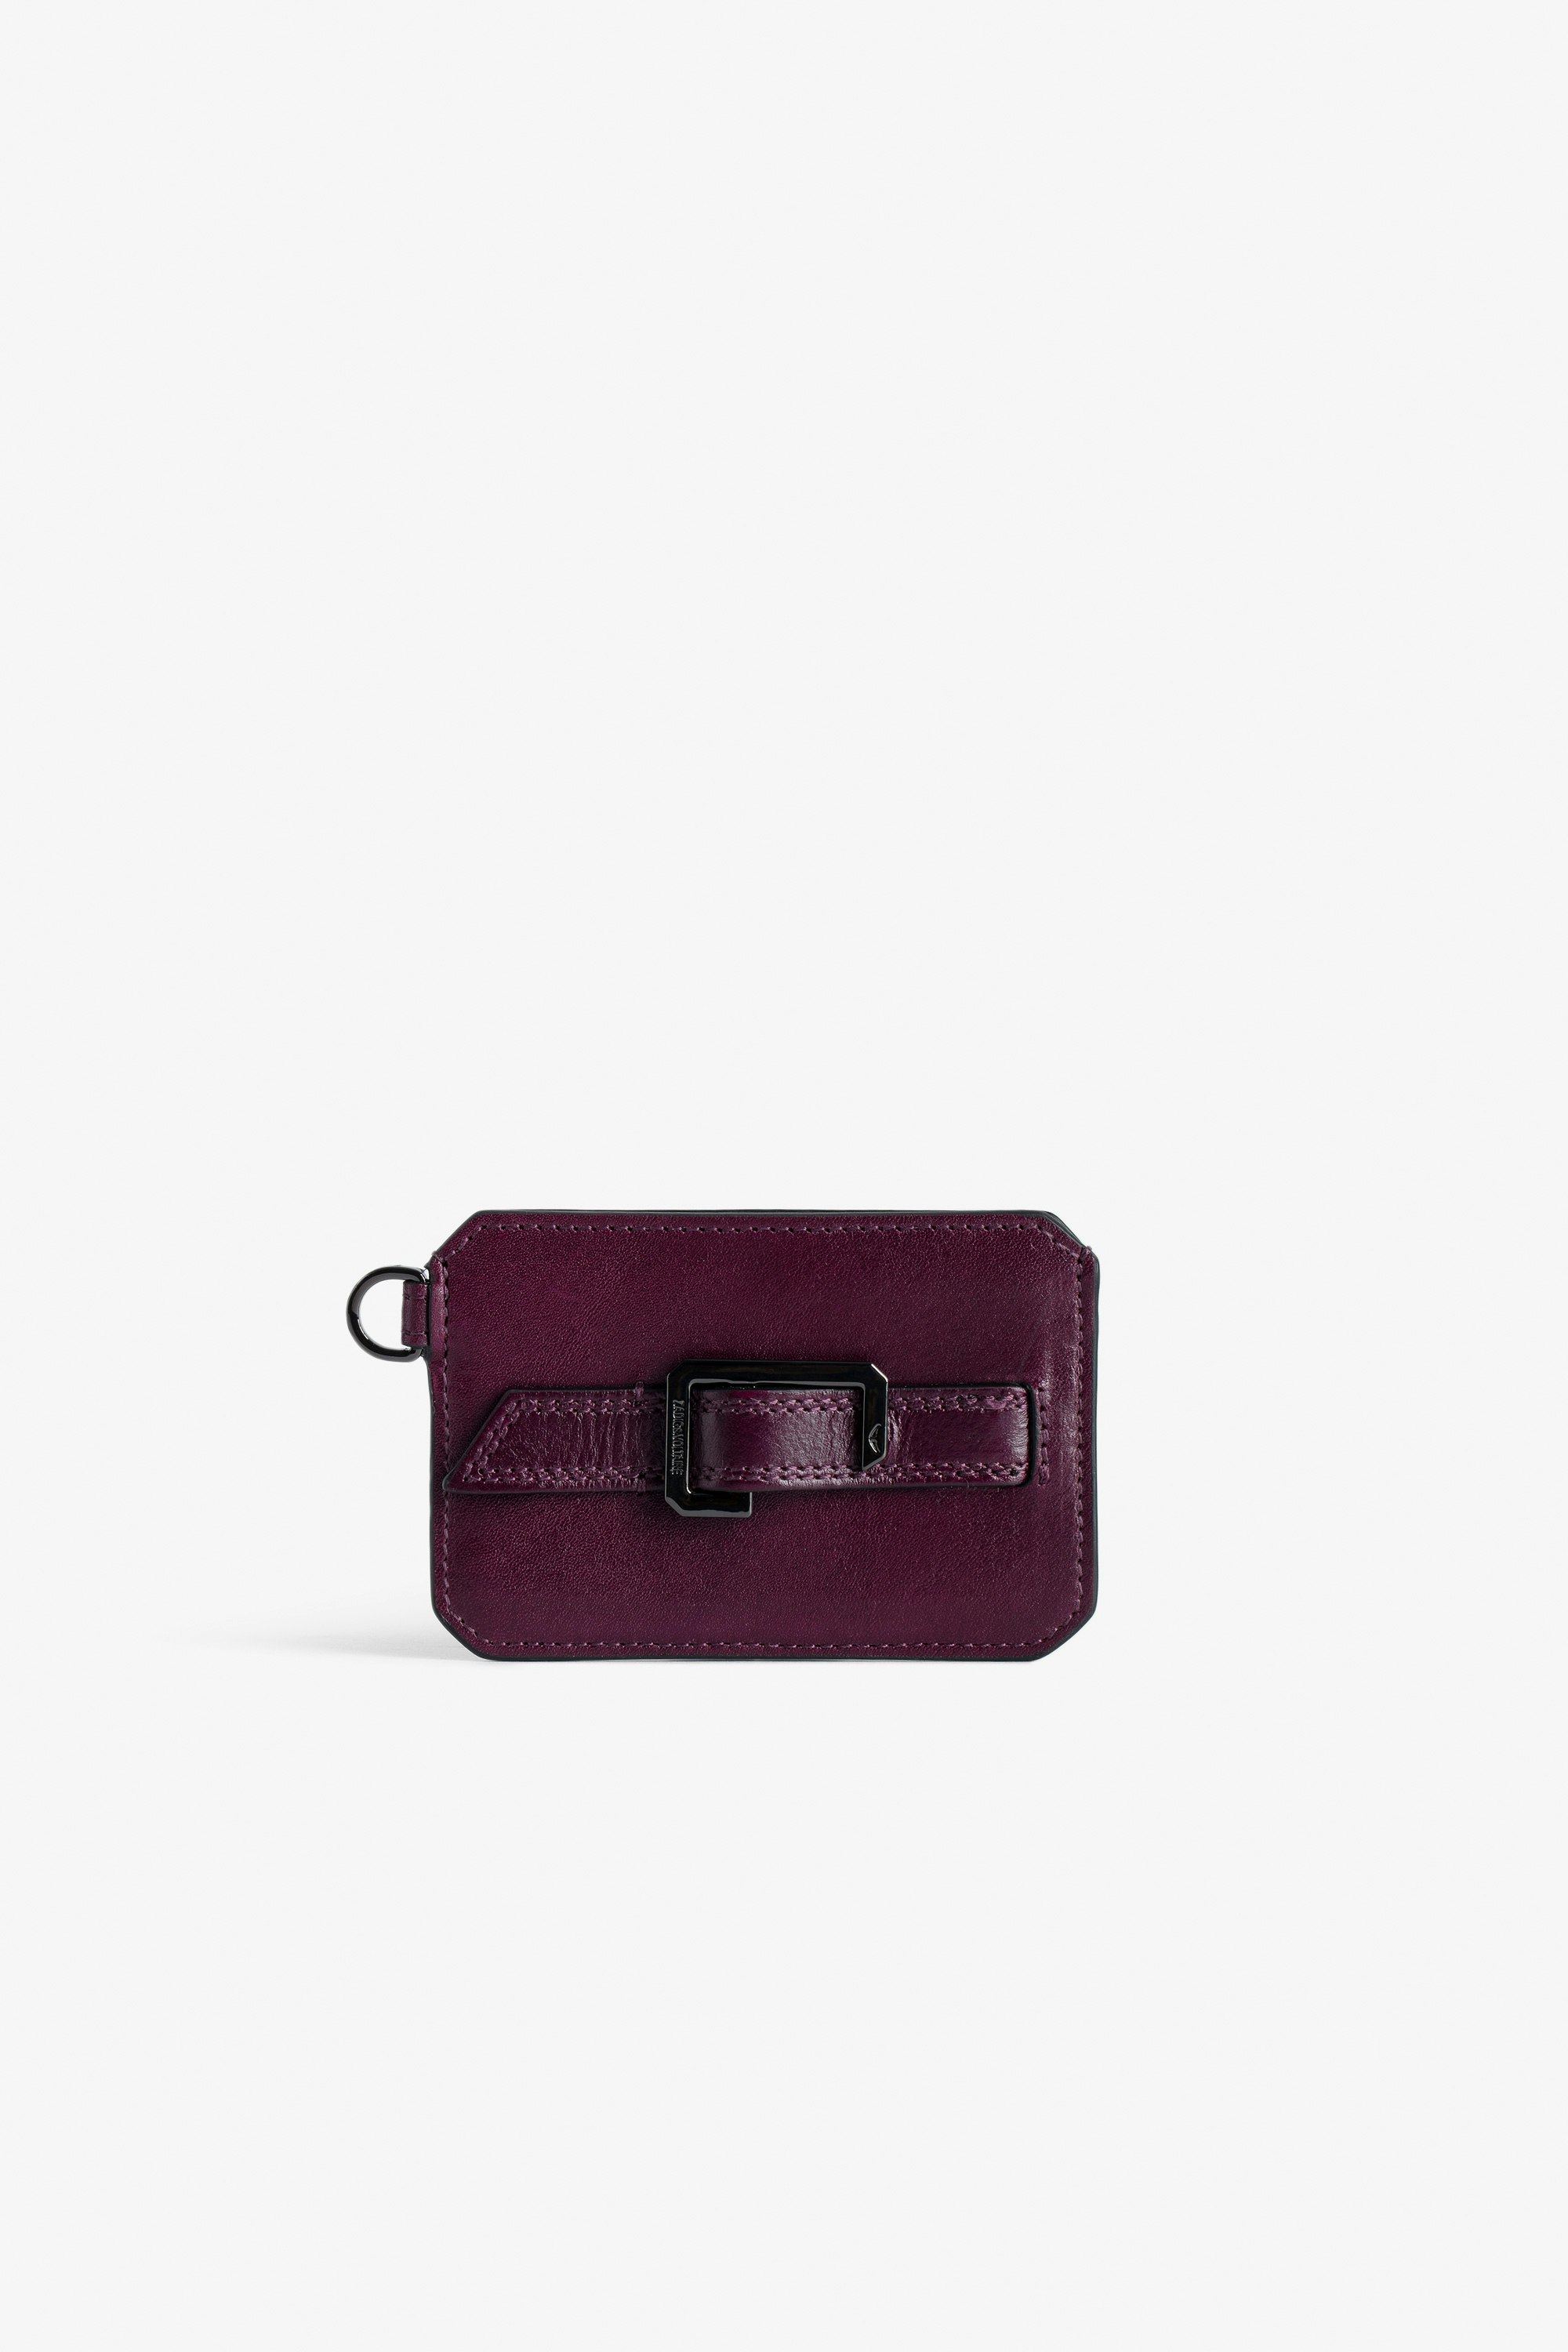 Le Cecilia Pass Card Holder Women’s burgundy leather card holder with C buckle.